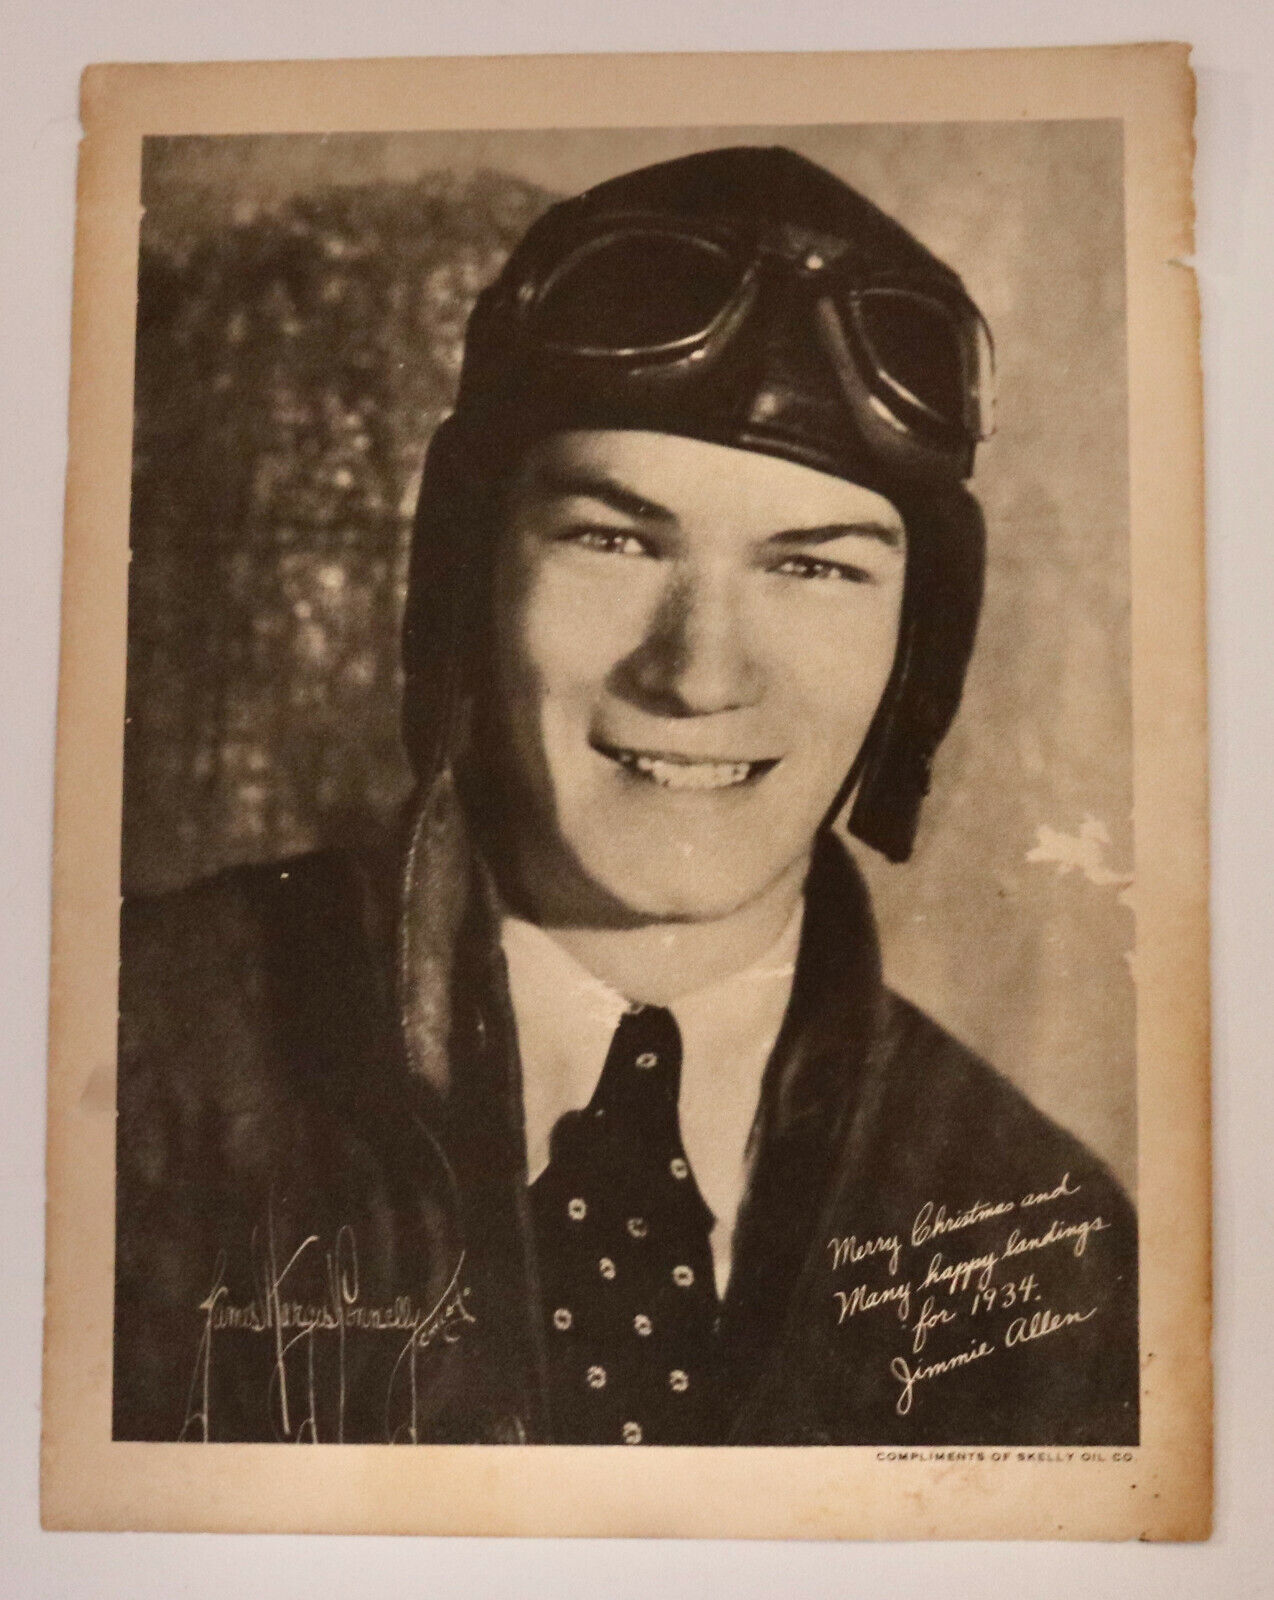 Jimmie Allen 1934 radio show pilot Christmas photo Skelly Oil Co.